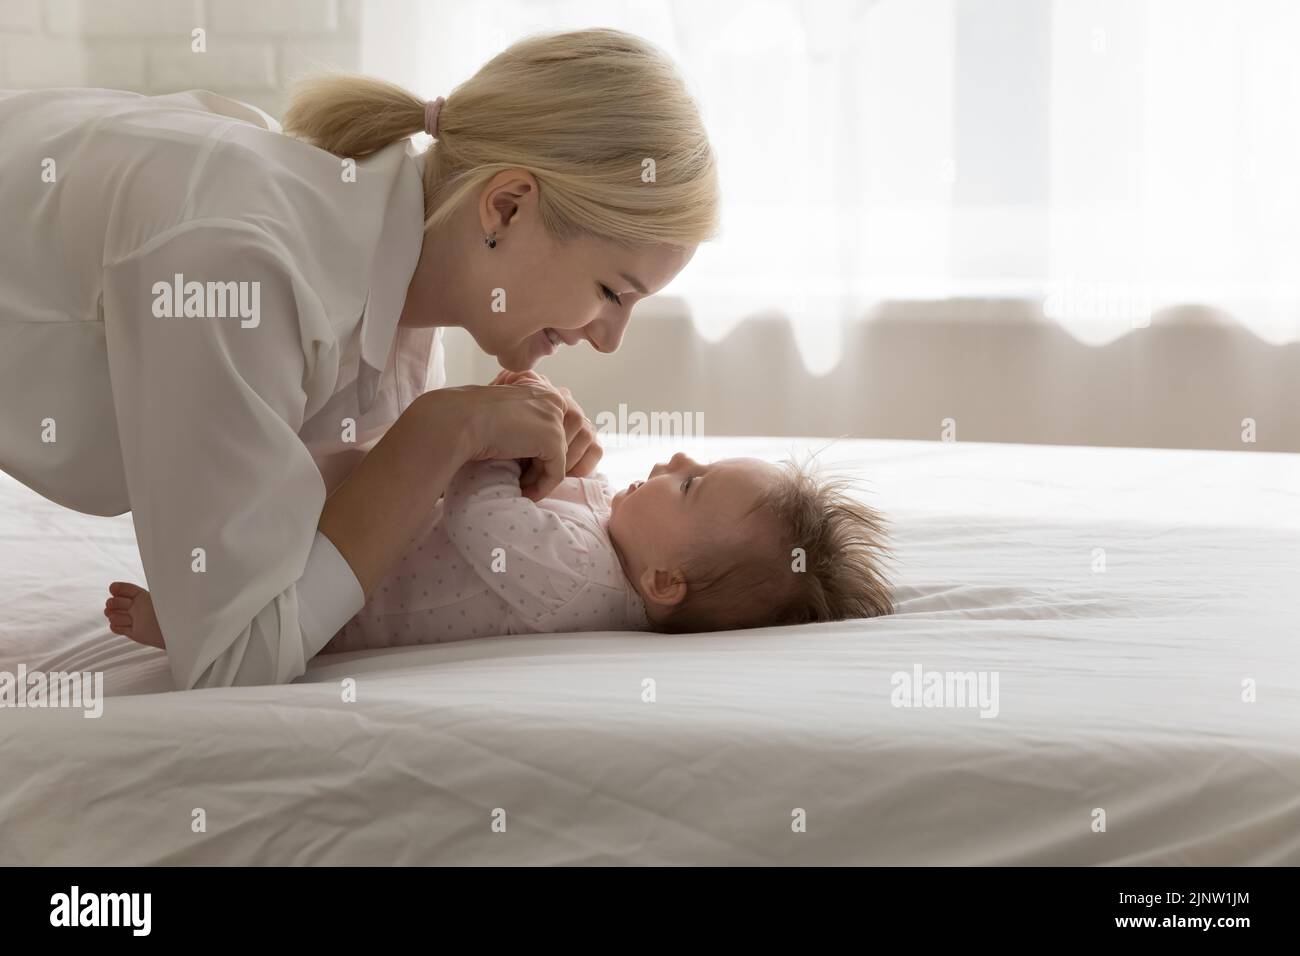 Mother spend priceless time, sweet moments with newborn baby Stock Photo